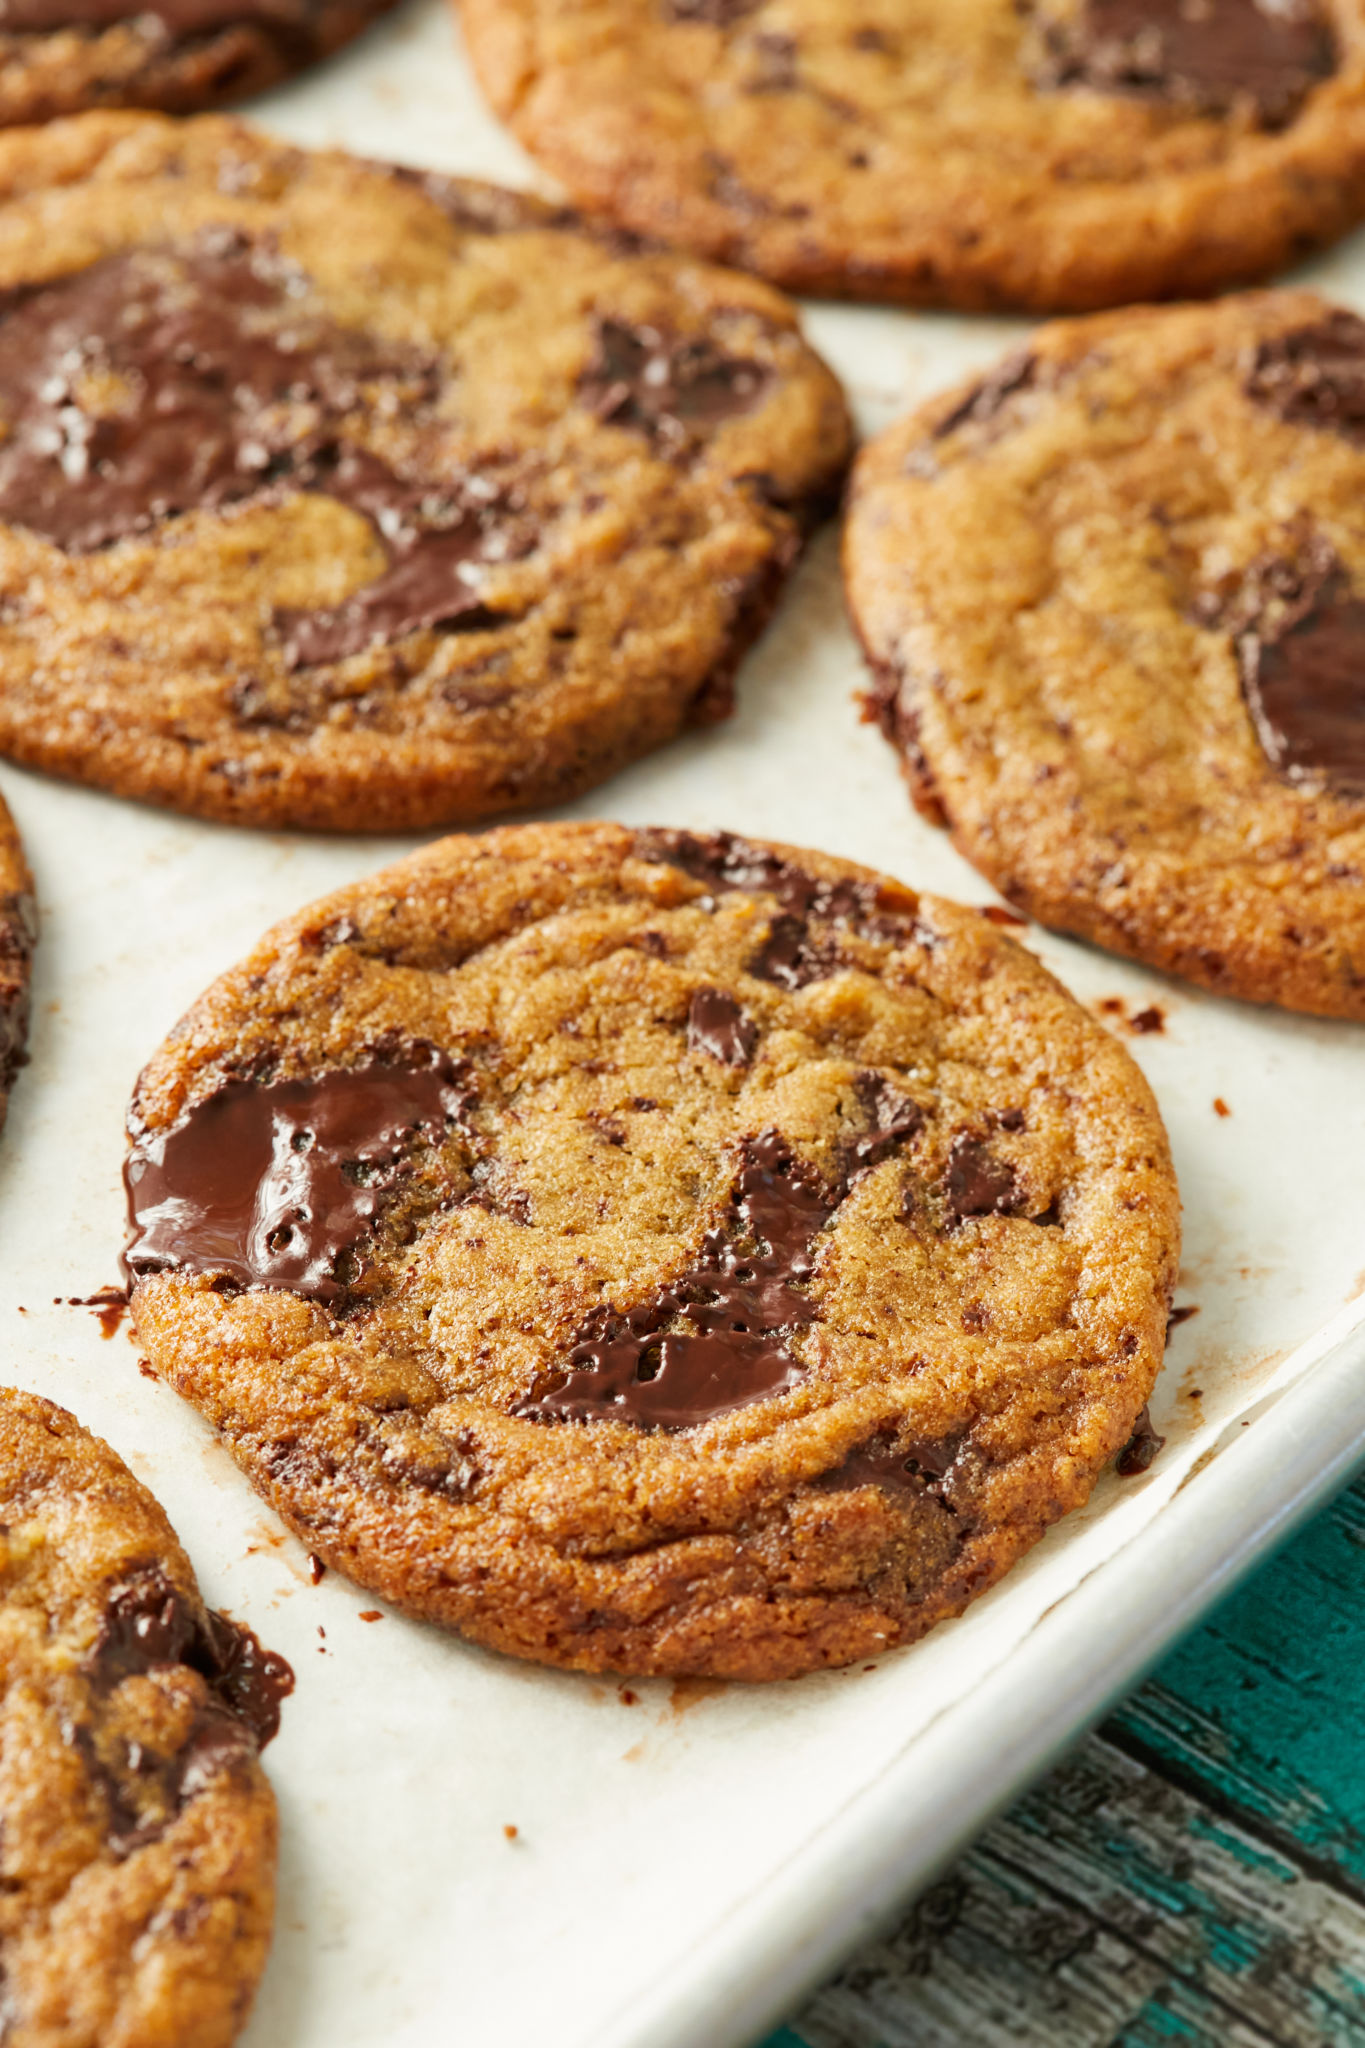 A close up of the internet's best chewy chocolate chip cookie.